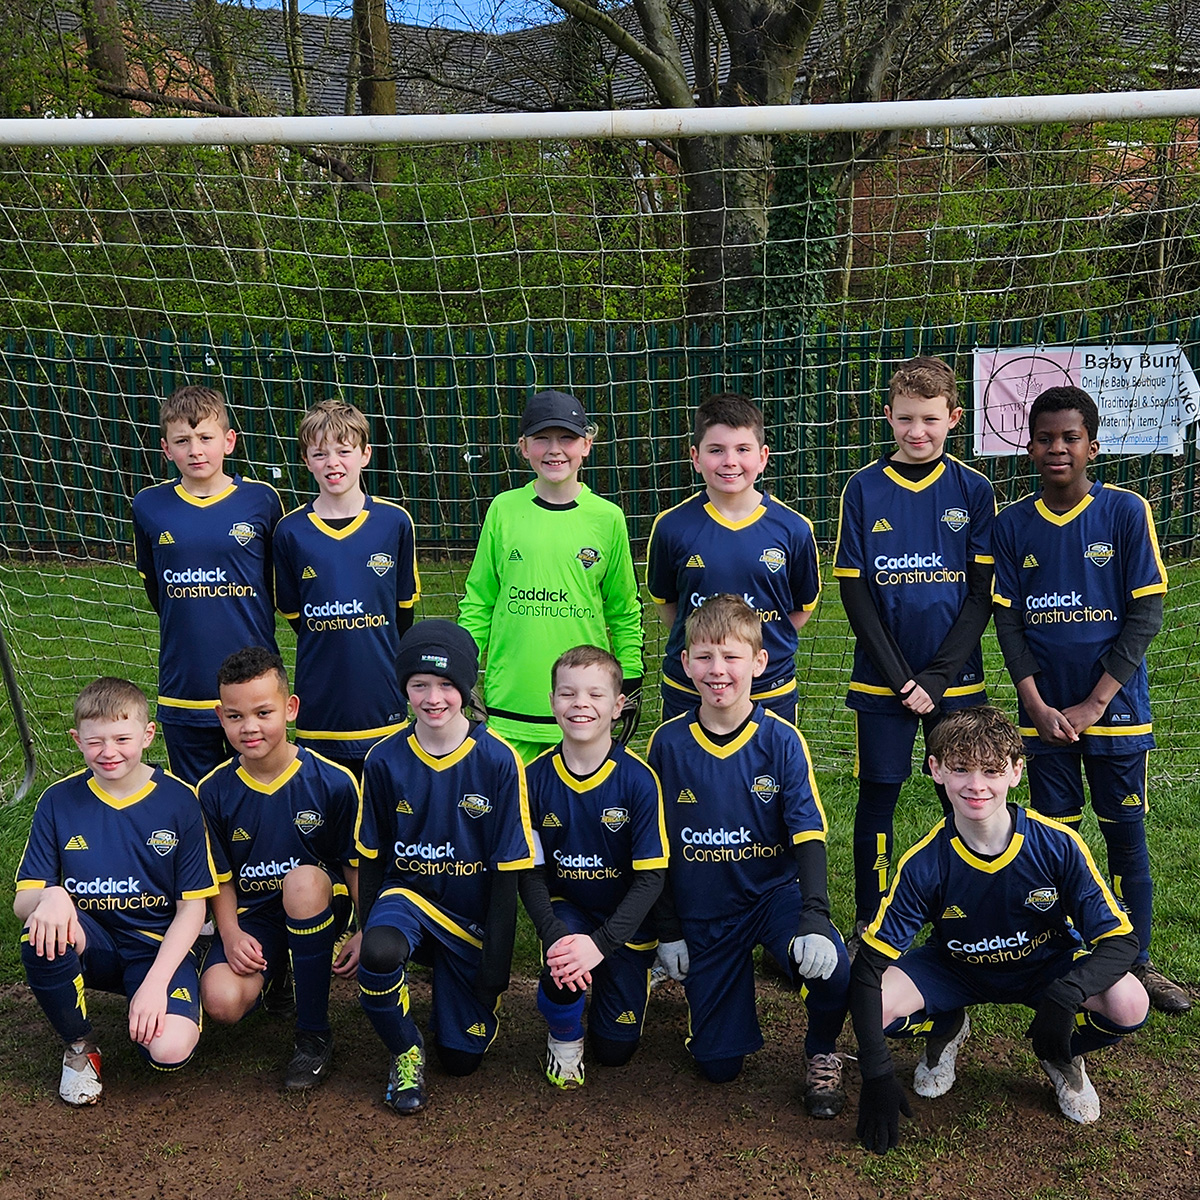 We are proud to be kit sponsors for the Newcastle Strikers under 11's team who are kicking off their next game in their brand new strip! ⚽️👕🥅 #NewcastleStrikers #Sponsorship #PlacesForLife